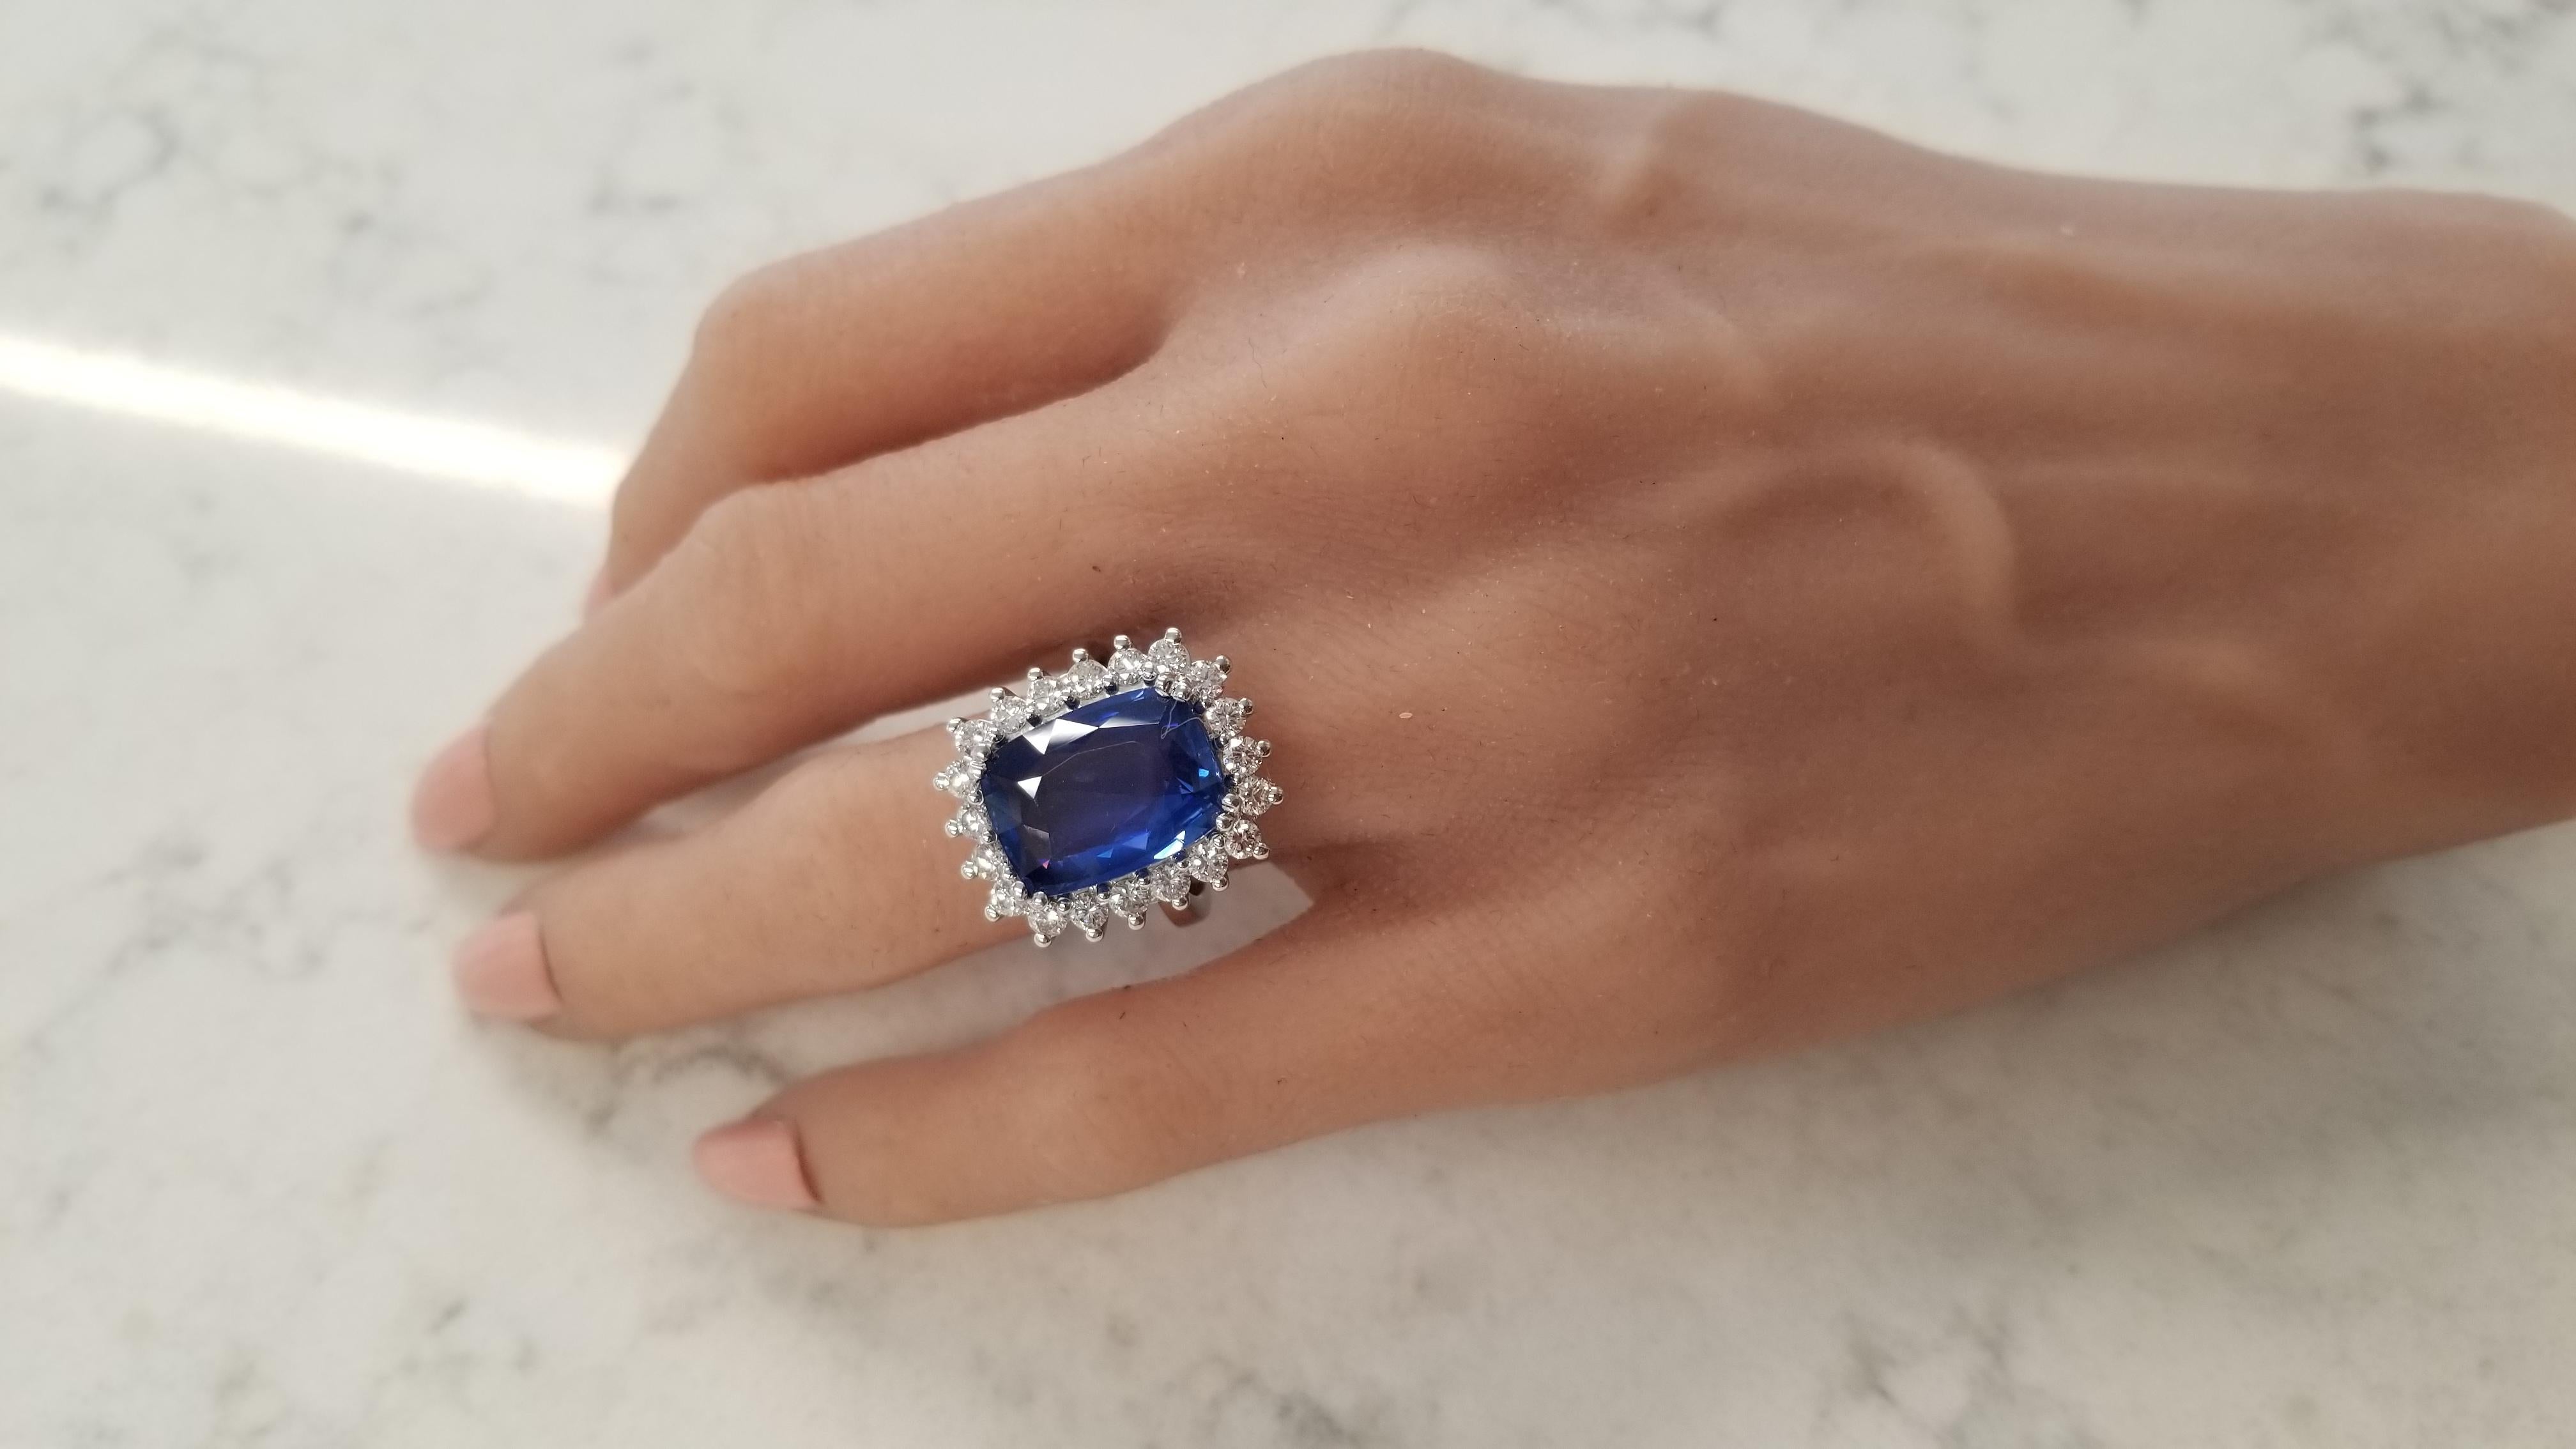 You'll make the statement with this ring that features a GIA certified 8.70 carat elongated cushion cut. Its gem source is Sri Lanka; its color is royal blue with hints of cornflower blue. It measures 14.39 X 10.70mm and has excellent transparency